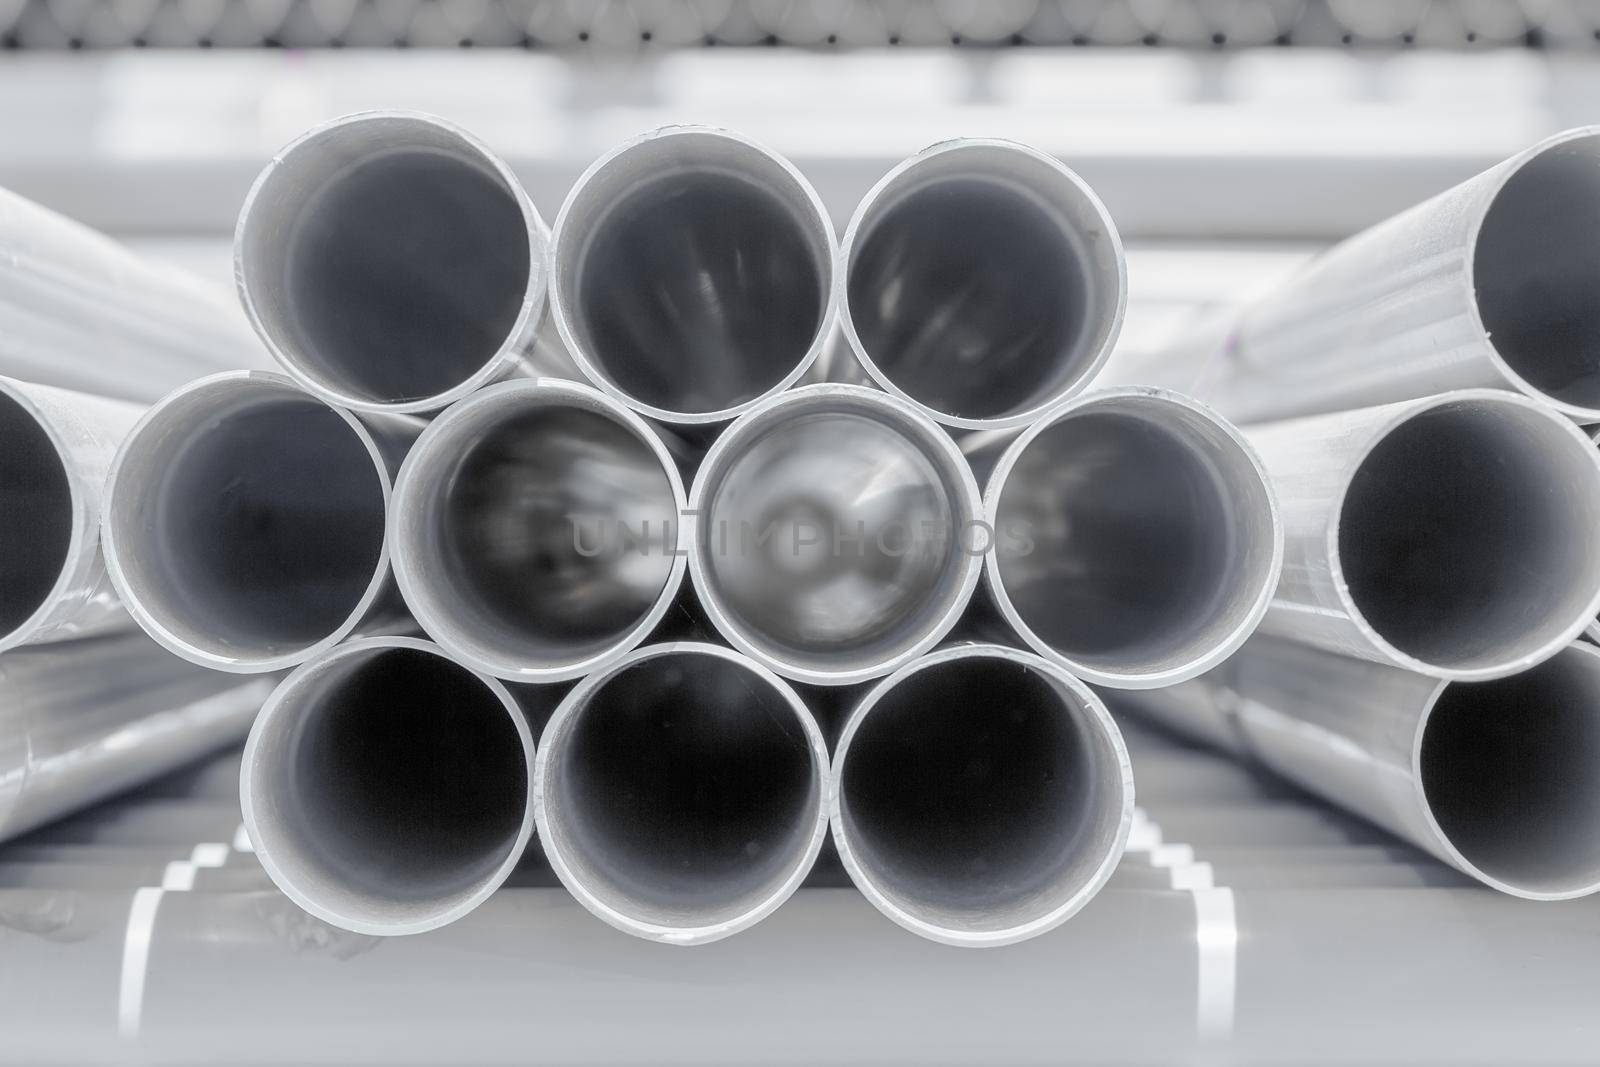 PVC pipes stacked in construction site by toa55